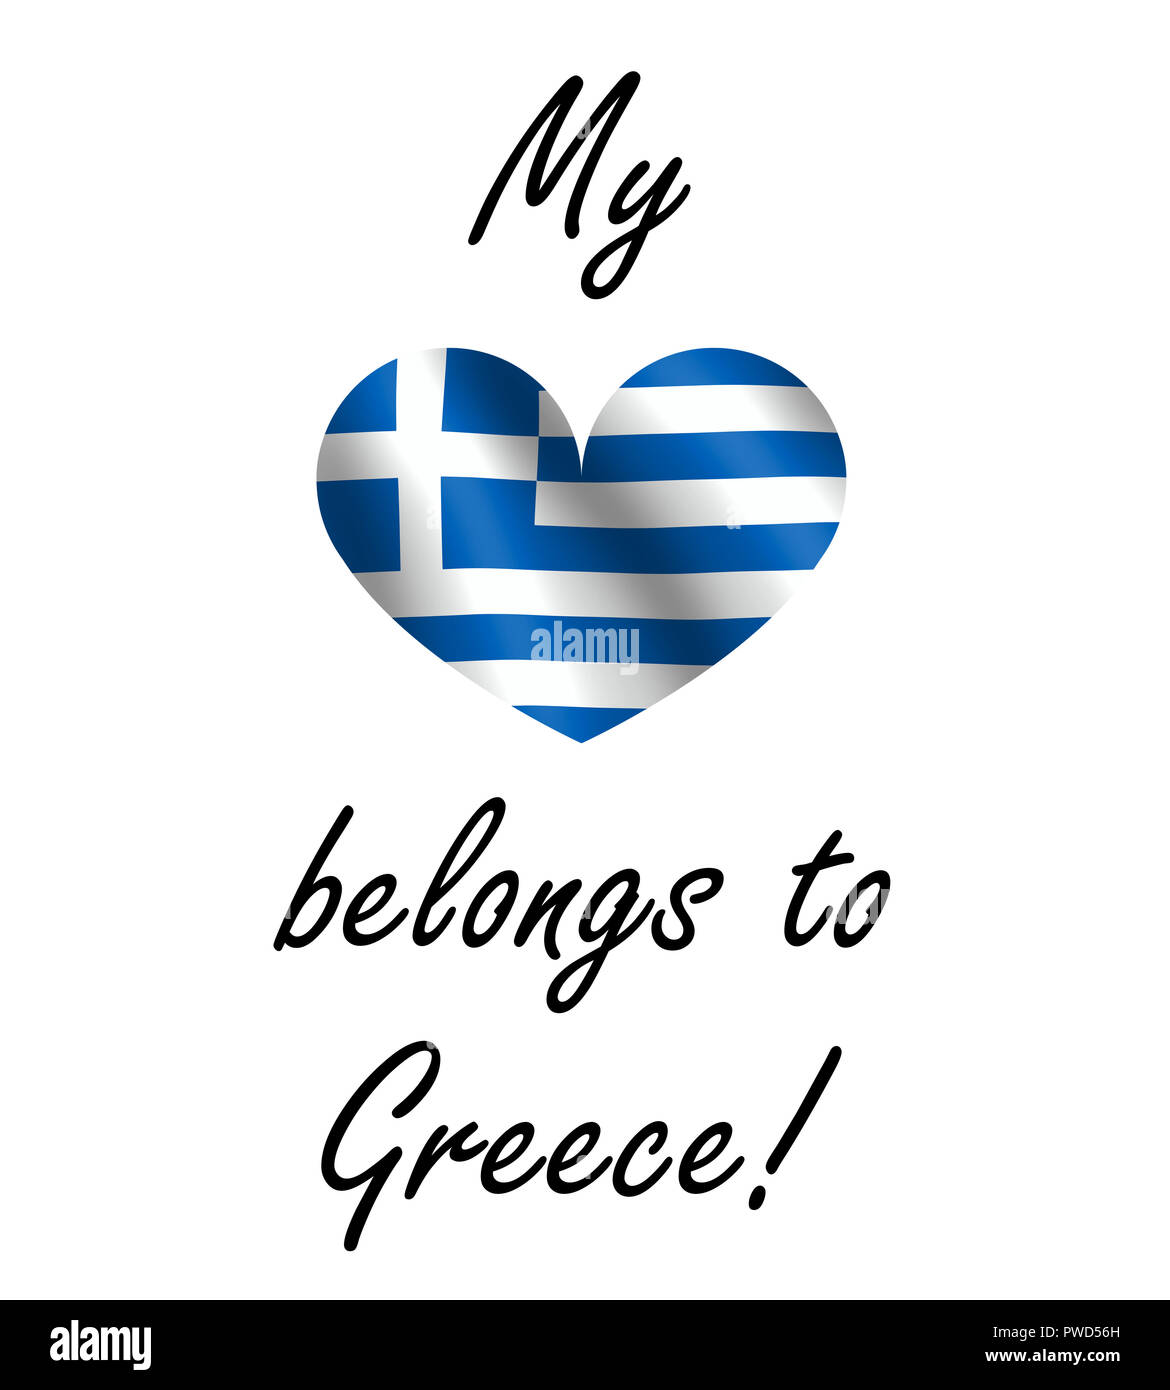 my heart belongs to greece illustration with the greek flag in heart shape  Stock Photo - Alamy